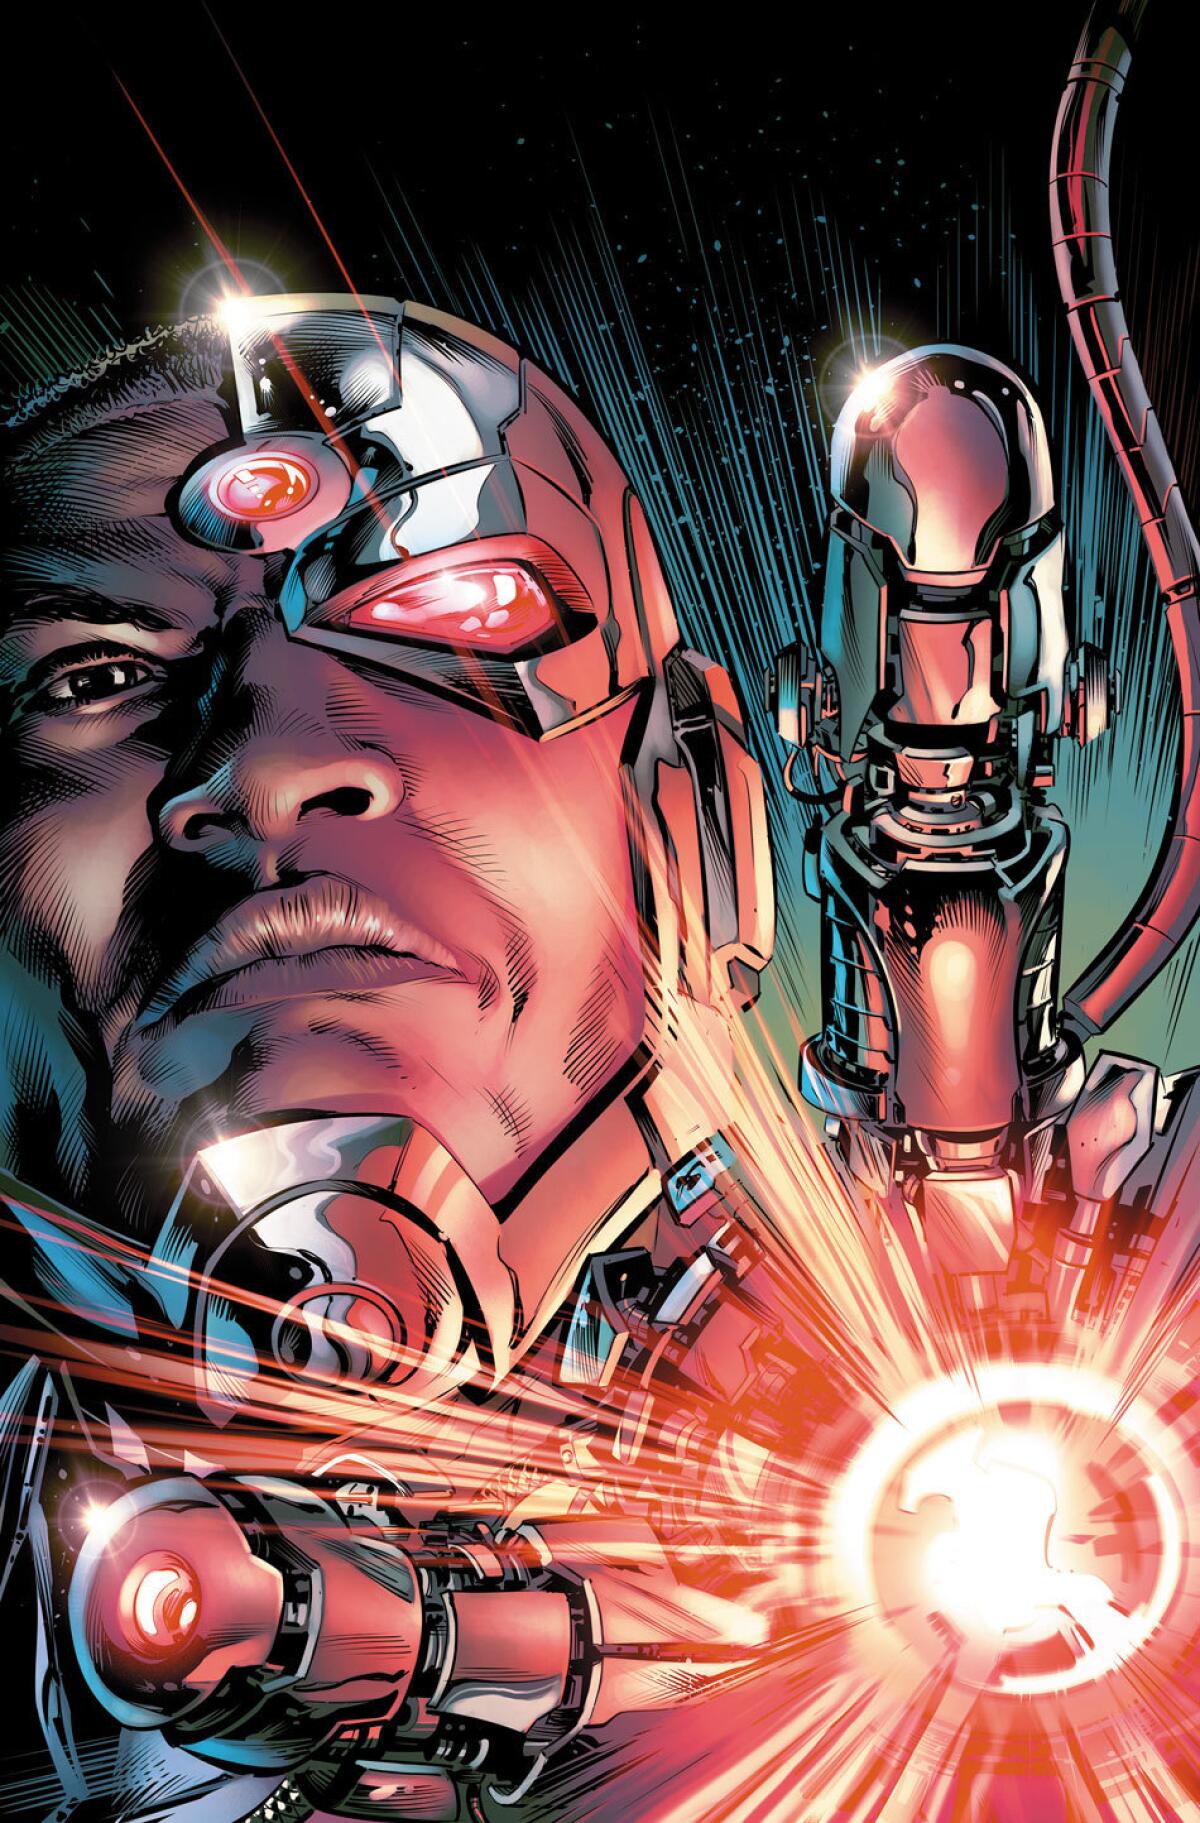 "Cyborg: Rebirth" No. 1. Written by John Semper with art by Will Conad and Paul Pelletier. (DC Comics)